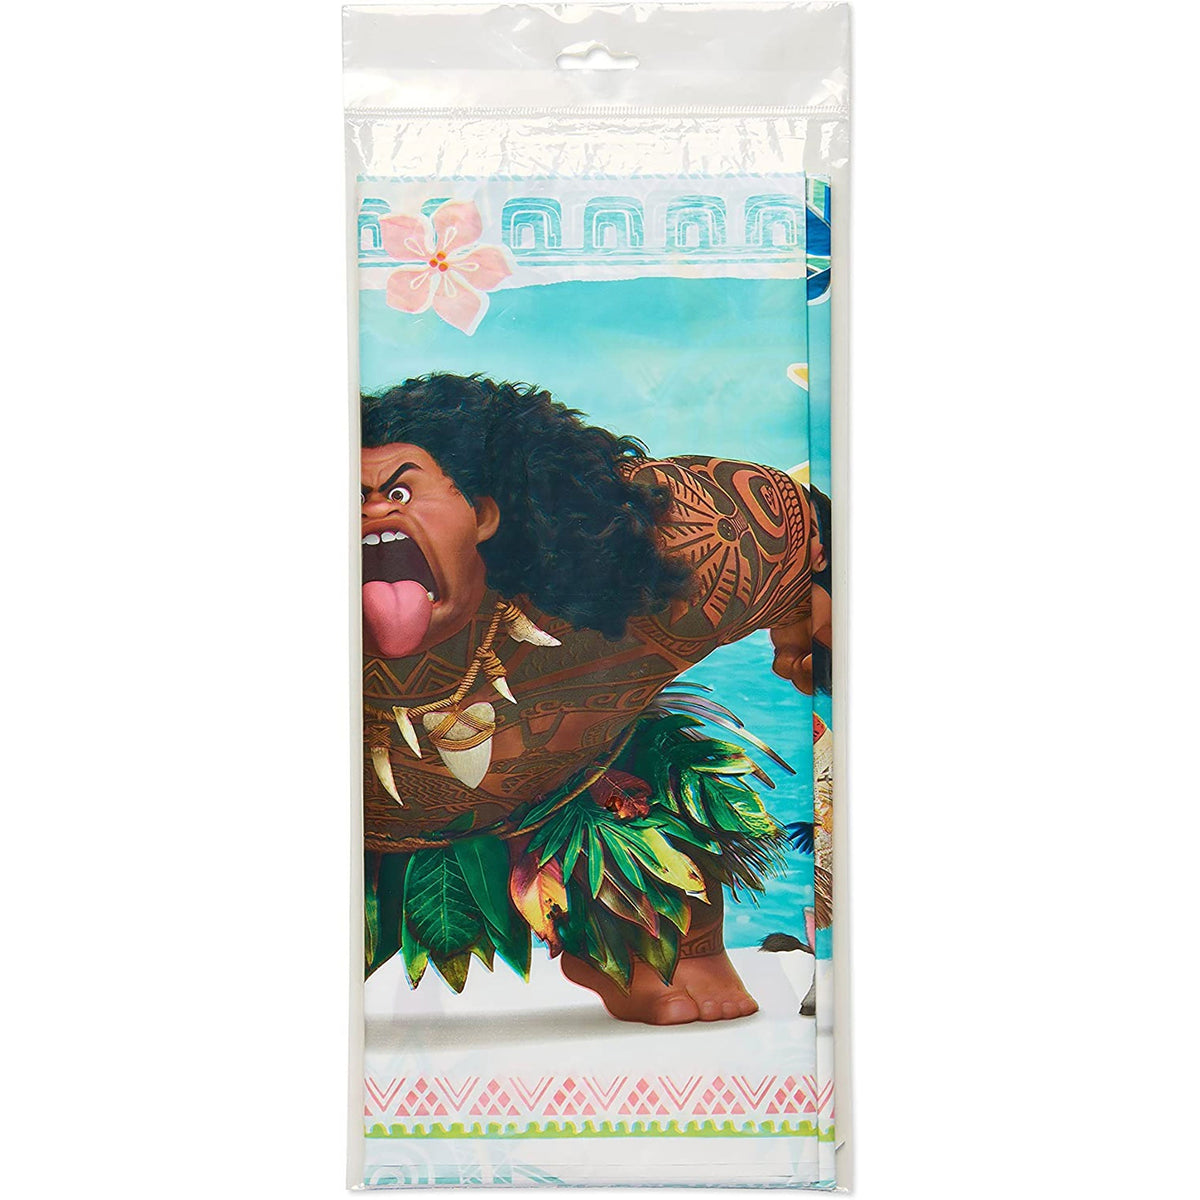 AMSCAN CA Kids Birthday Disney Moana Plastic Tablecover, 54 x 96 Inches, 1 Count